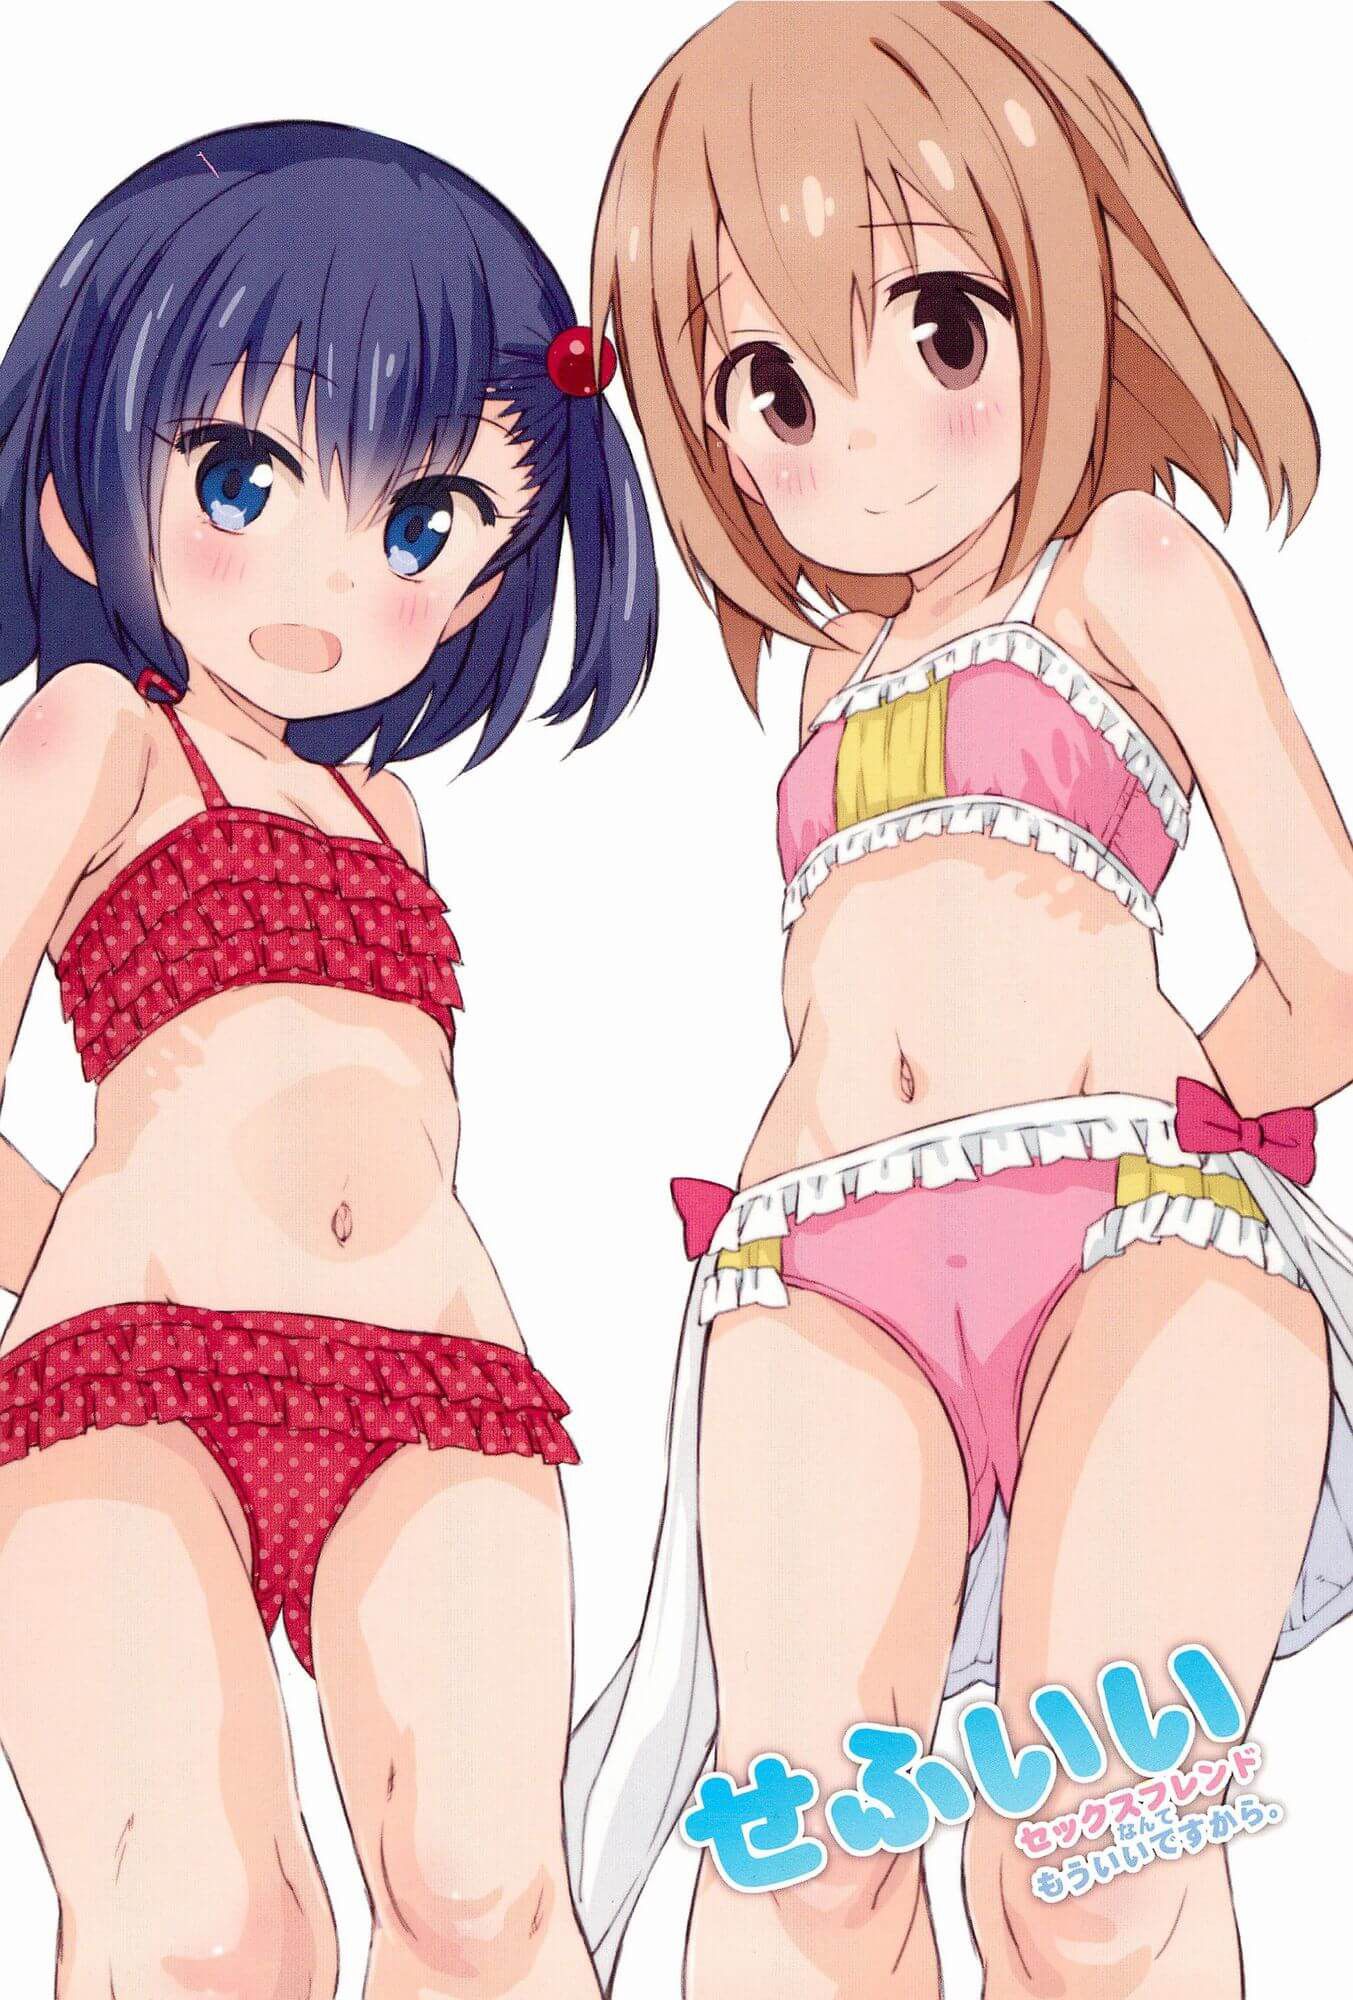 [Secondary erotic] I collected two-dimensional images for lolicons that feel cute in either high or low exposure. 1